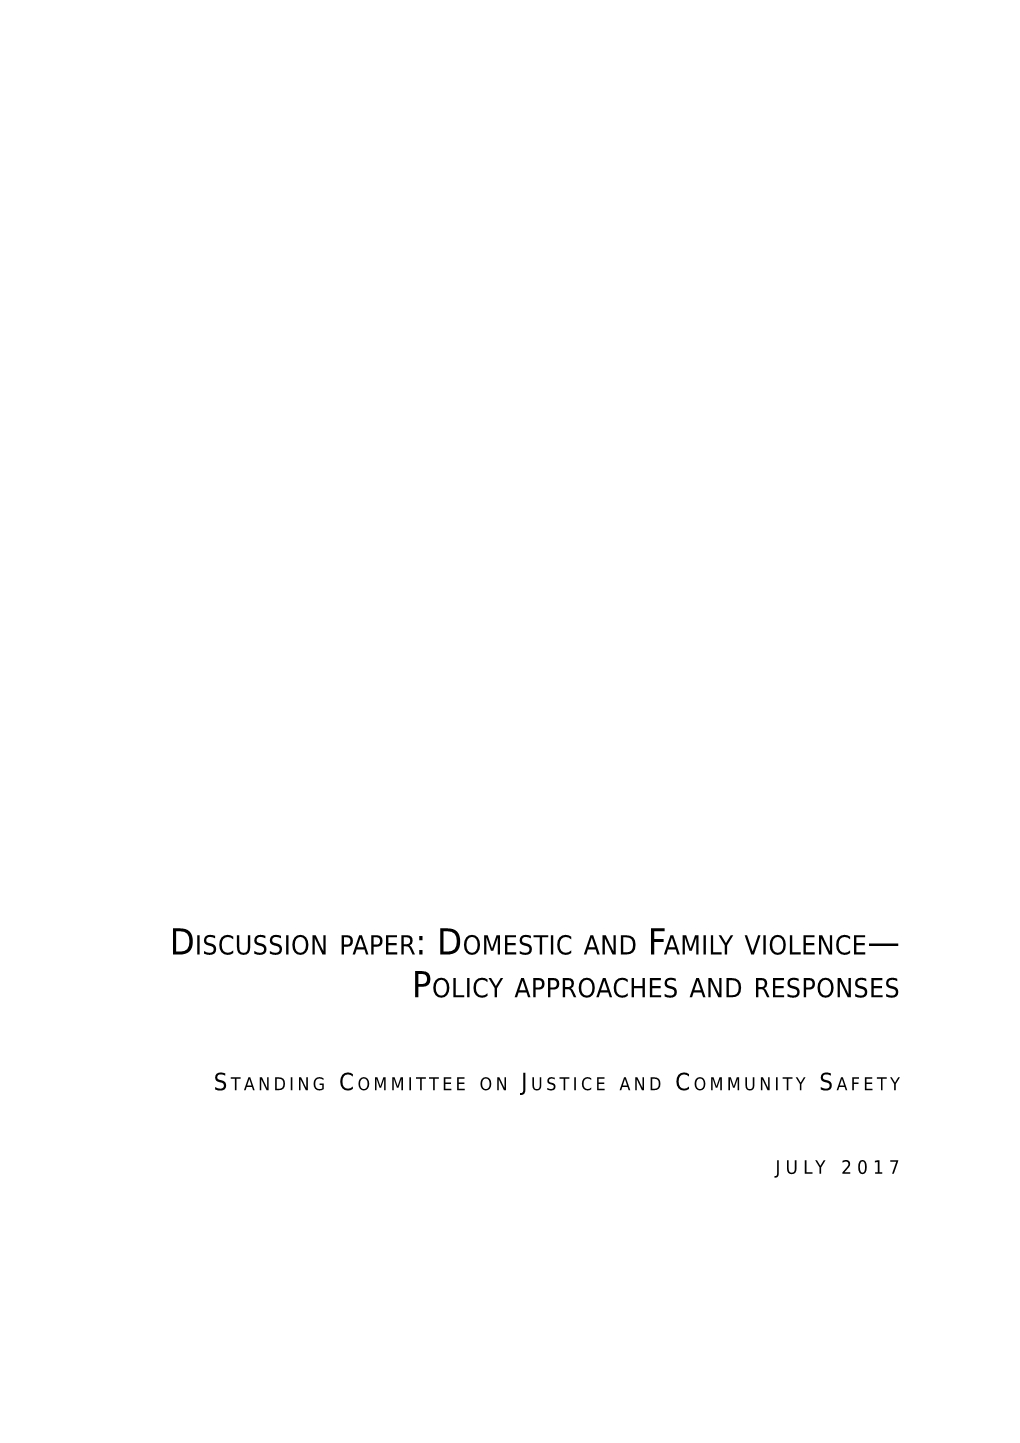 Discussion Paper: Domestic and Family Violence Policy Approaches and Responses